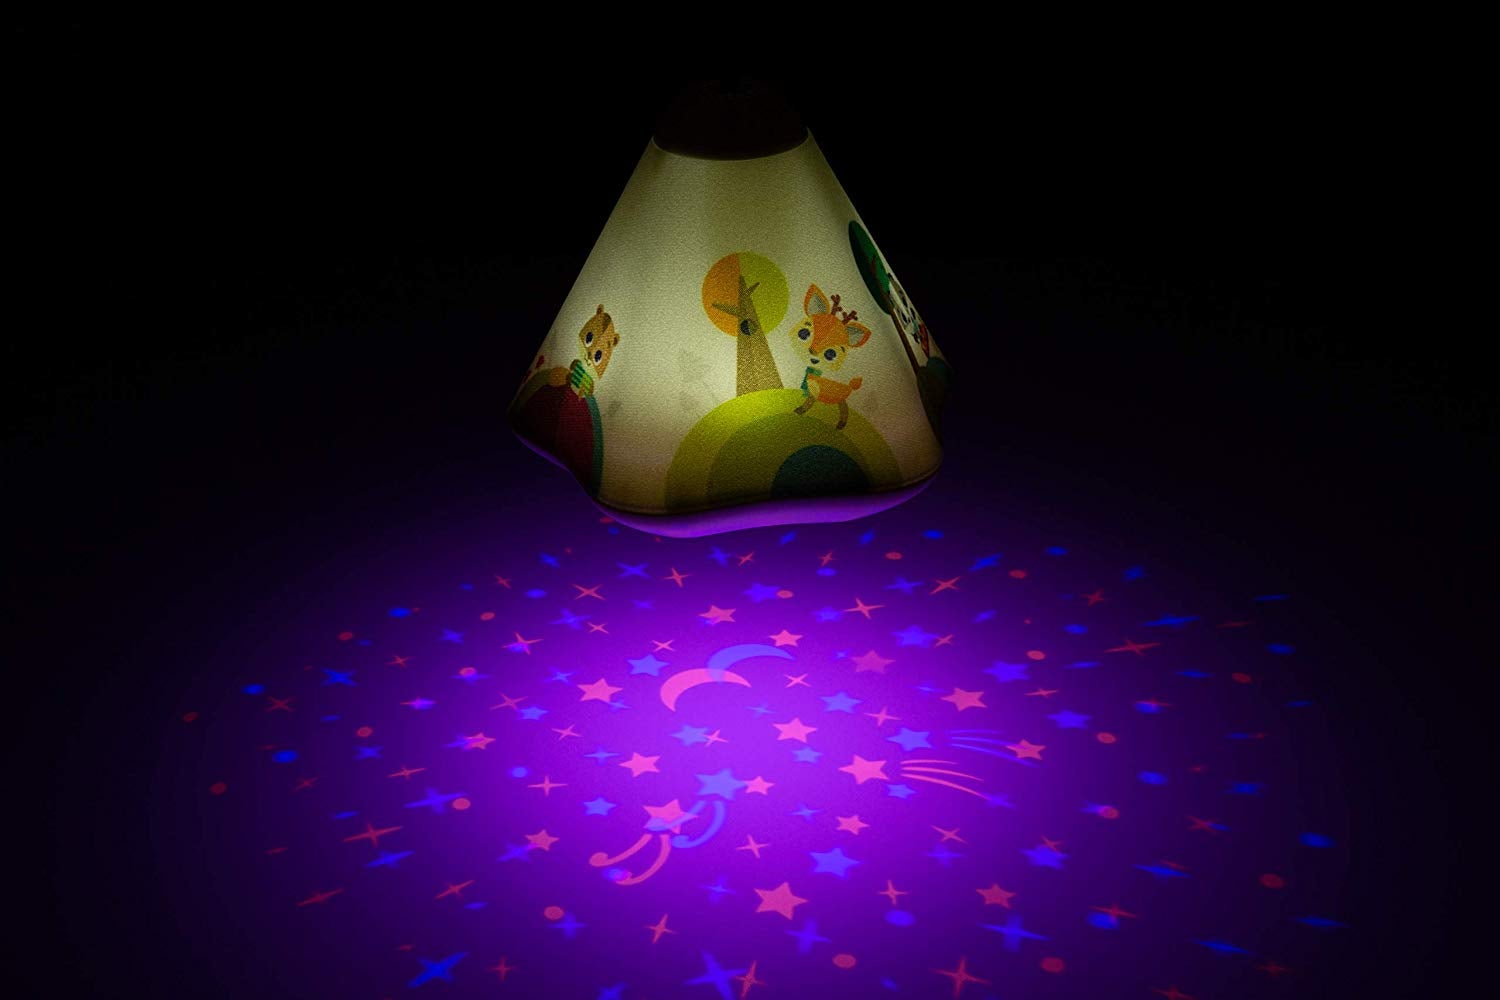 TINY LOVE Into the Forest Tiny Dreamer Musical Projector - ANB Baby -$20 - $50